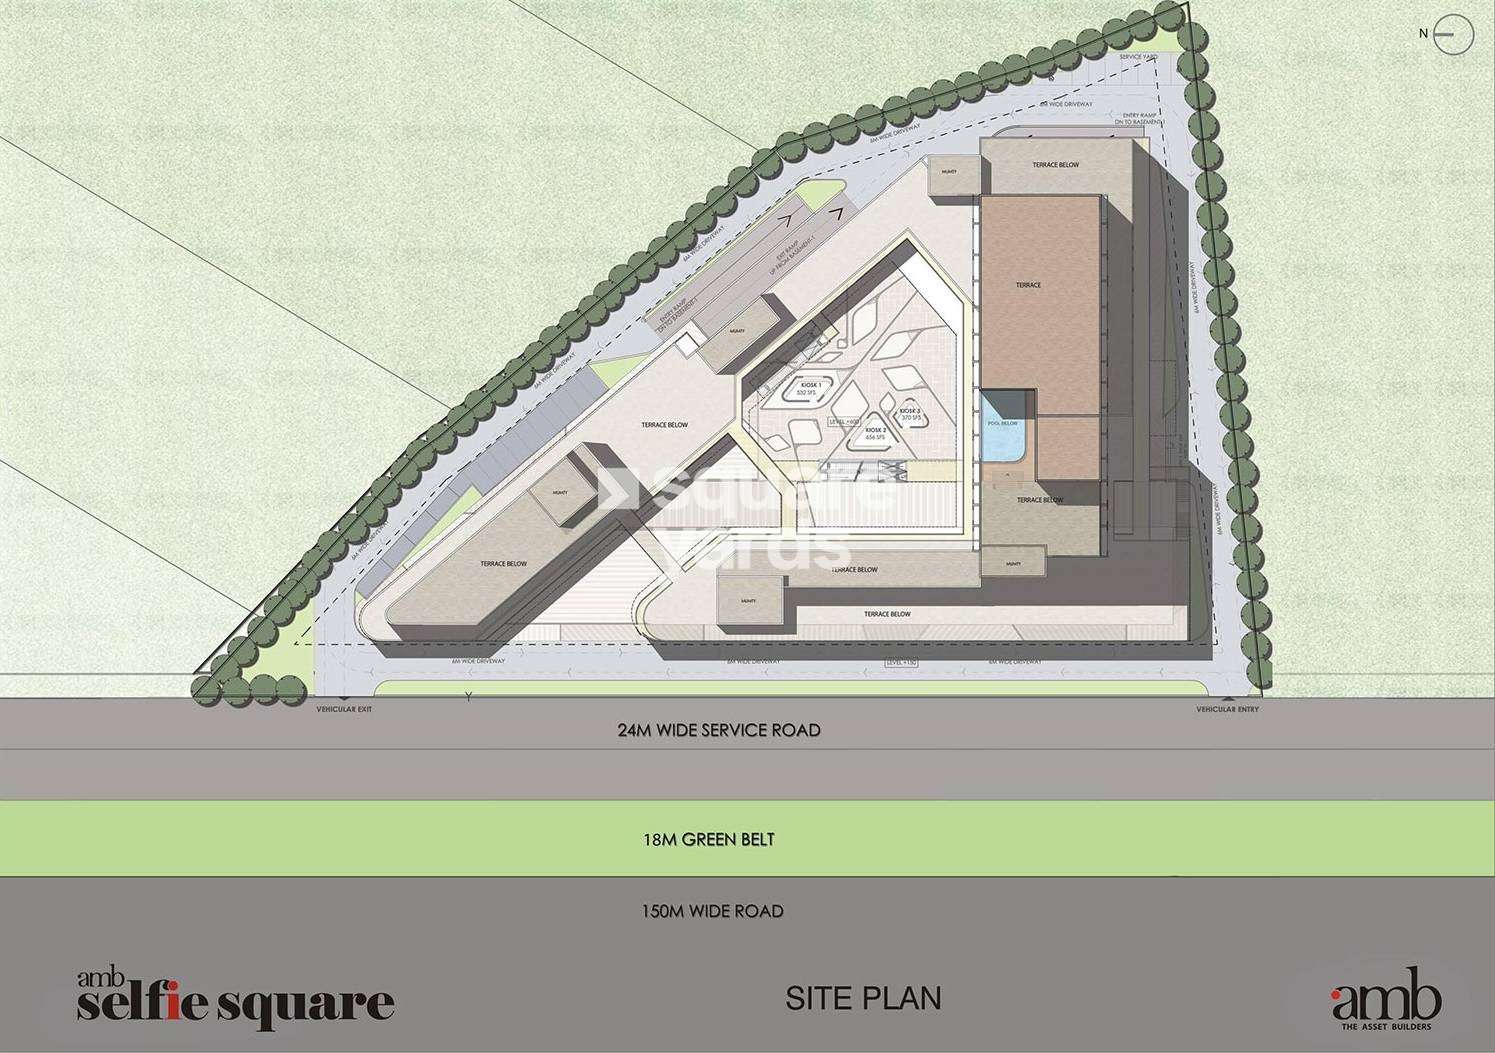 amb selfie square project master plan image1